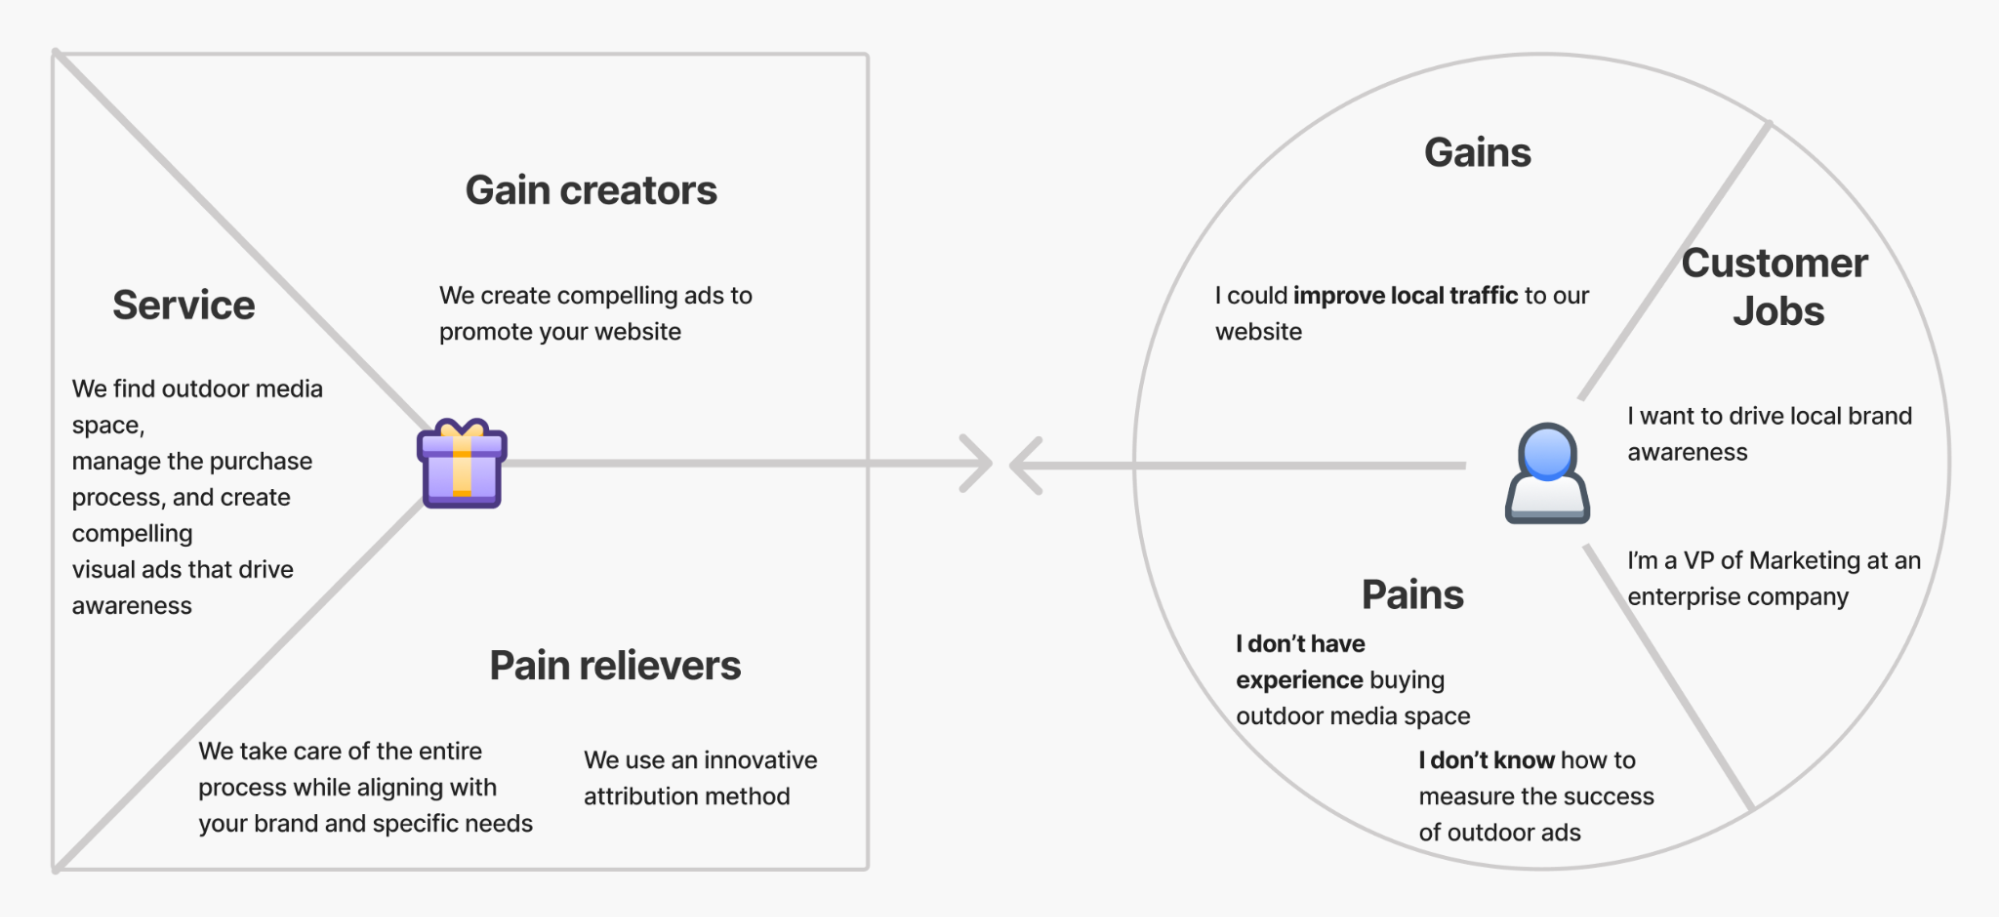 A Value Proposition Canvas for my campaign example